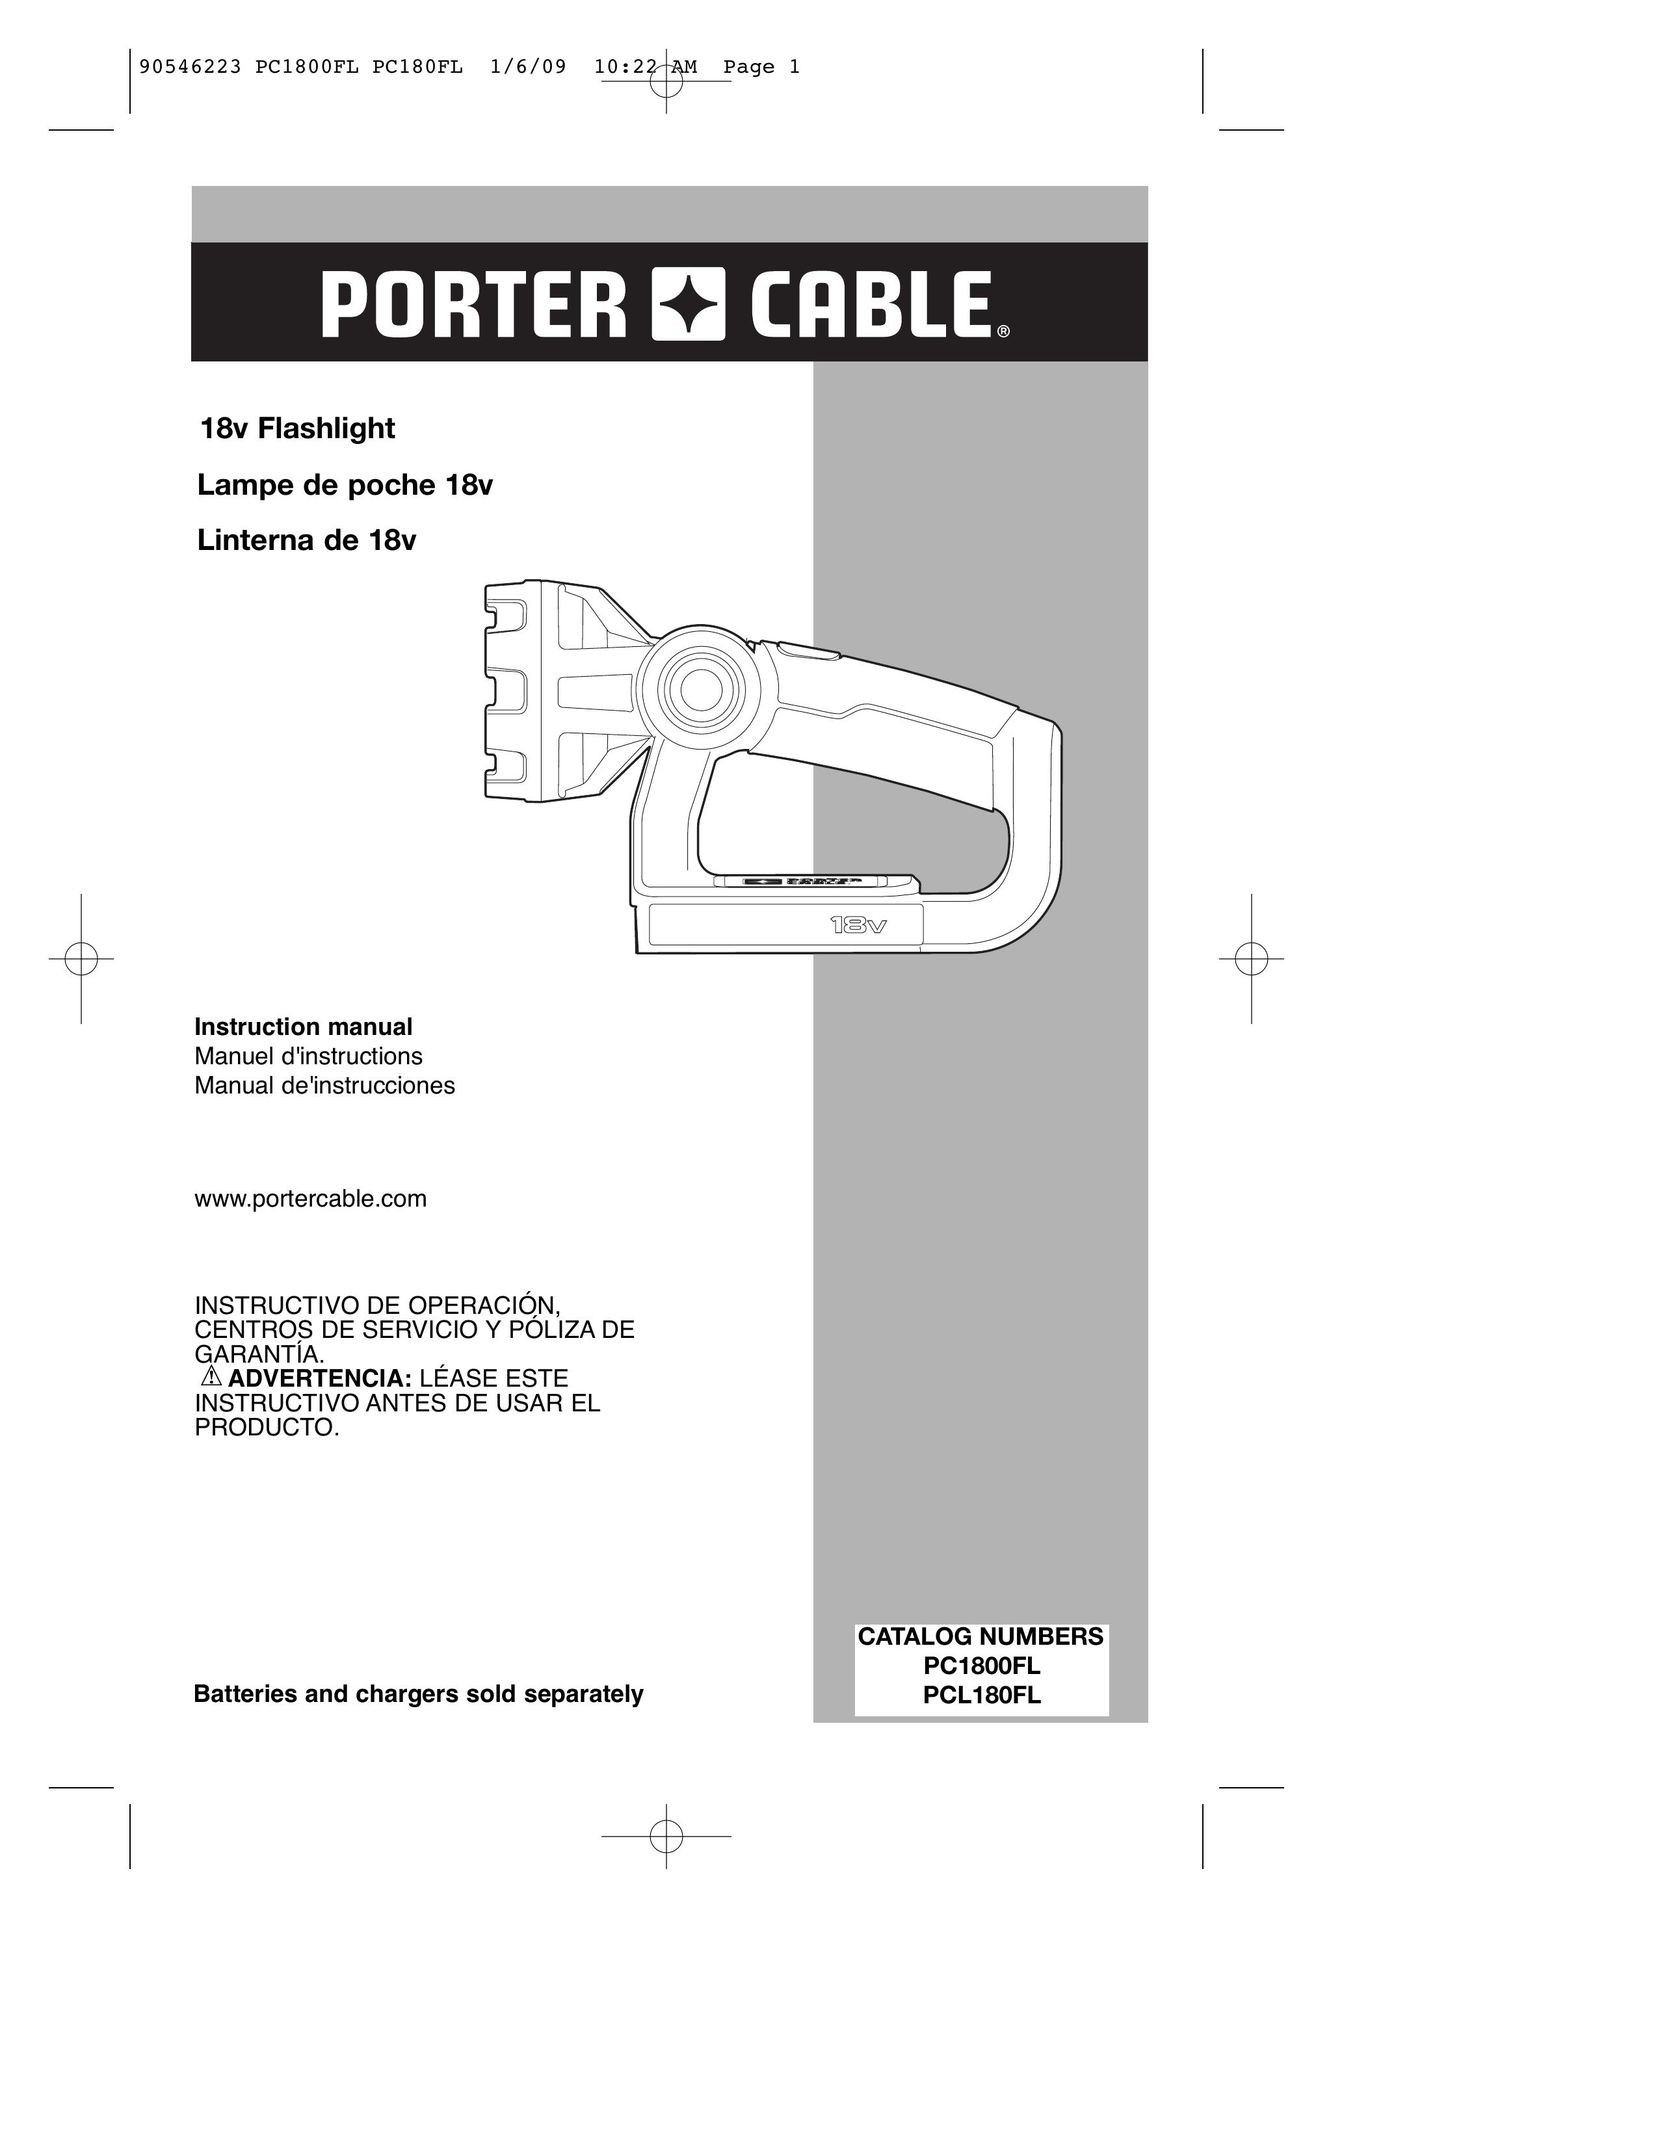 Porter-Cable PC1800FL Home Safety Product User Manual